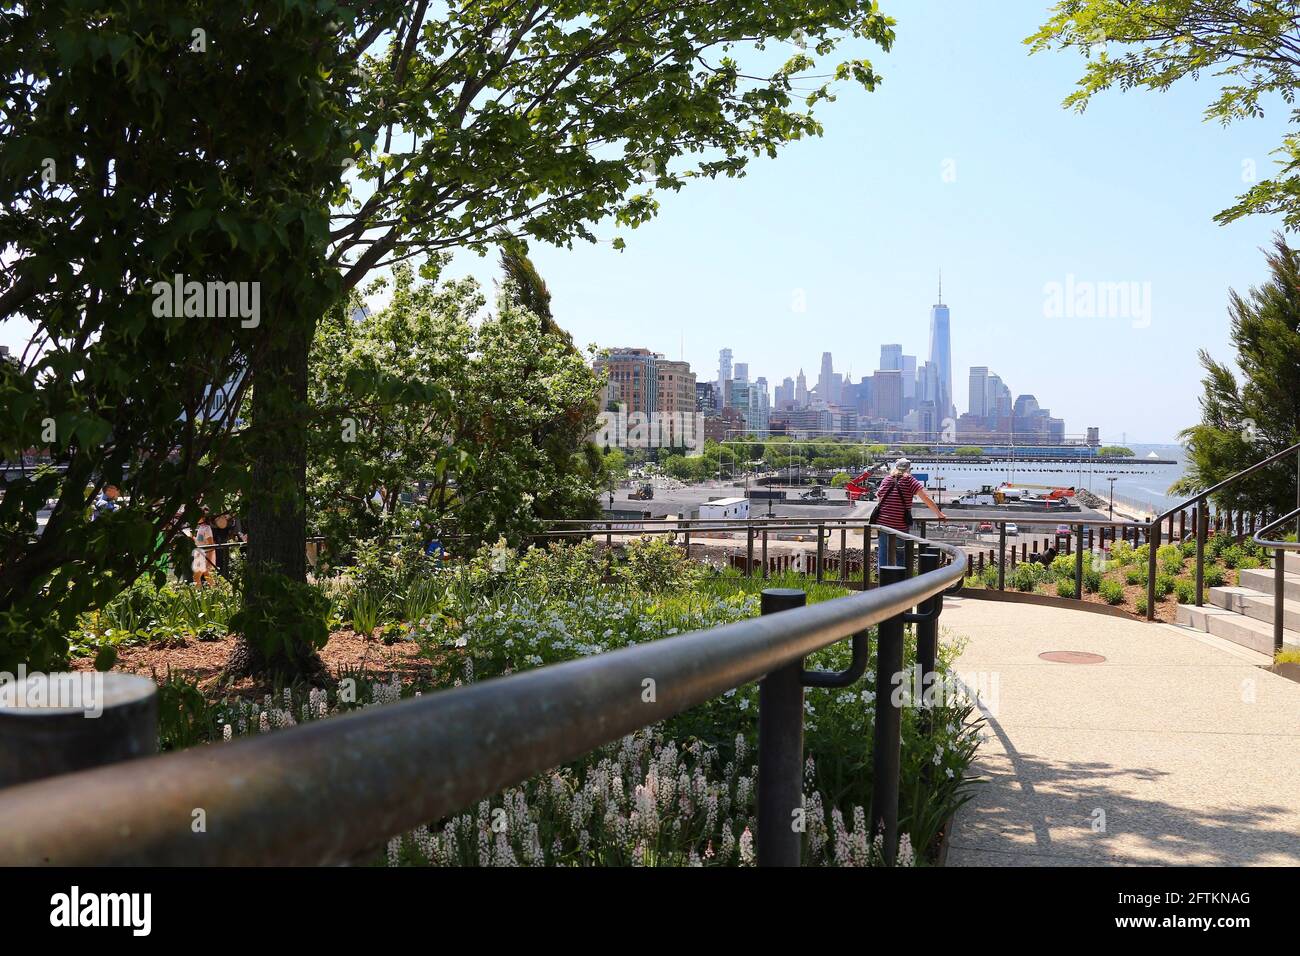 New NYC park 'Little Island' opens on the Husdon River Park created by Barry Diller and Diane Von Furstenberg for $260 Million in New York, NY on May 21, 2021.Photo by Charles Guerin/ABACAPRESS.COM Stock Photo